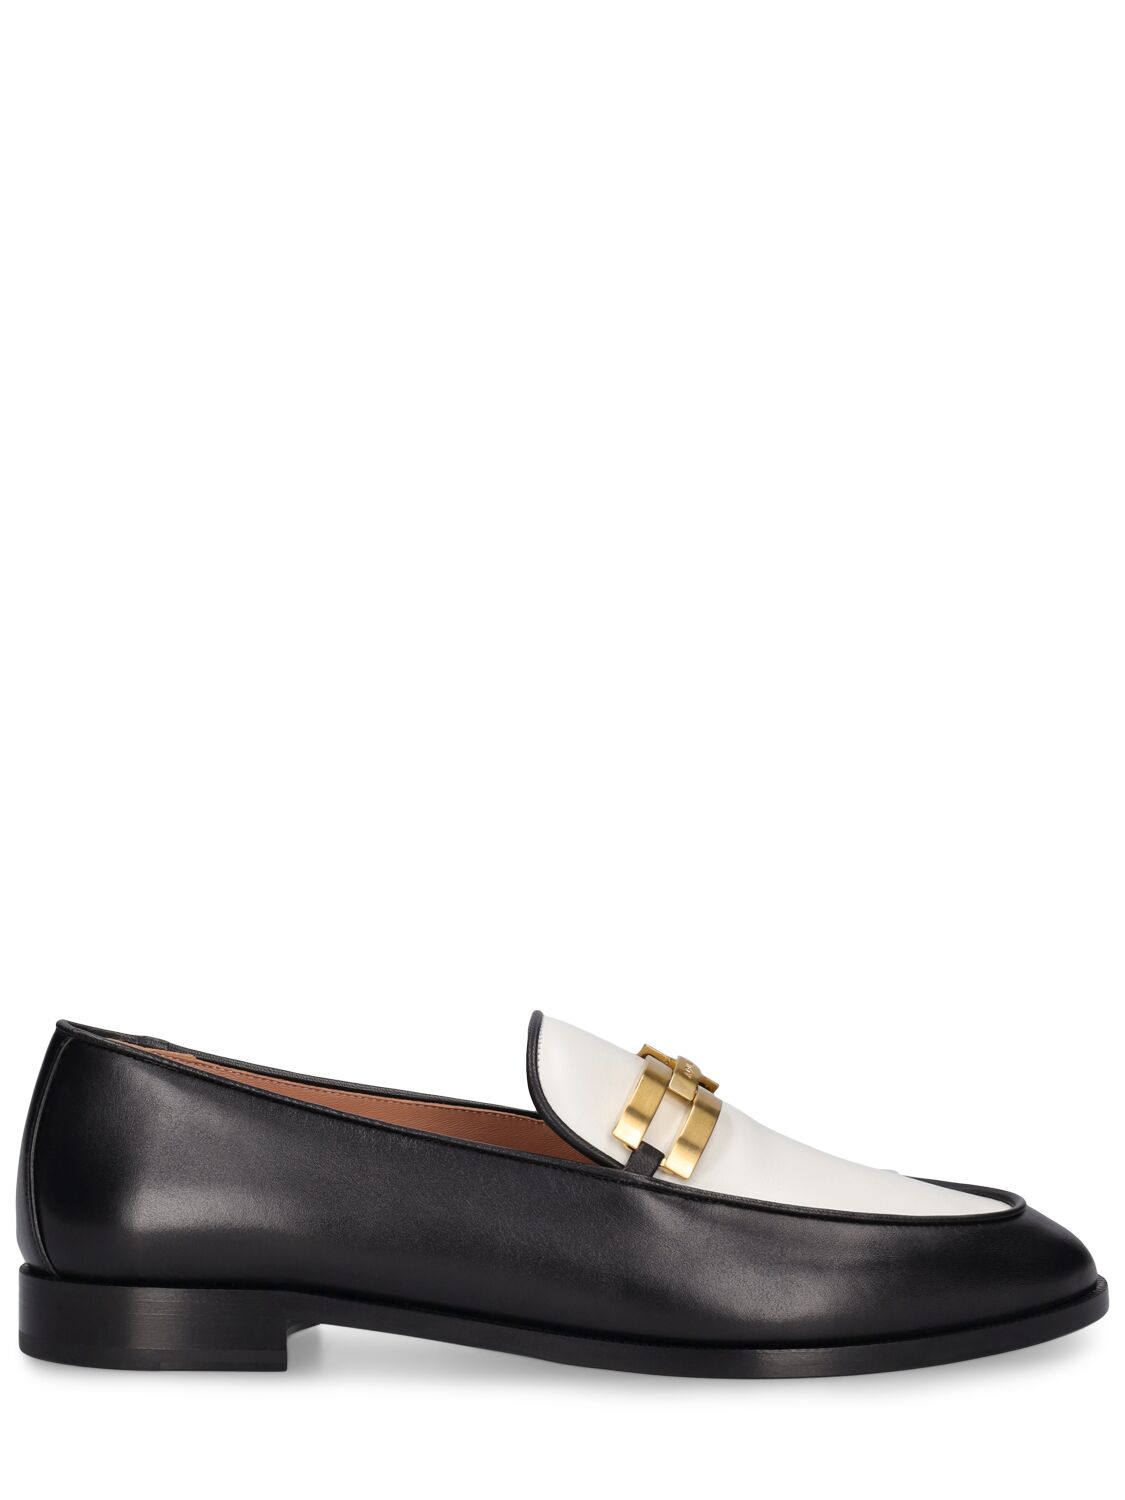 Image of Brandi Leather Loafers